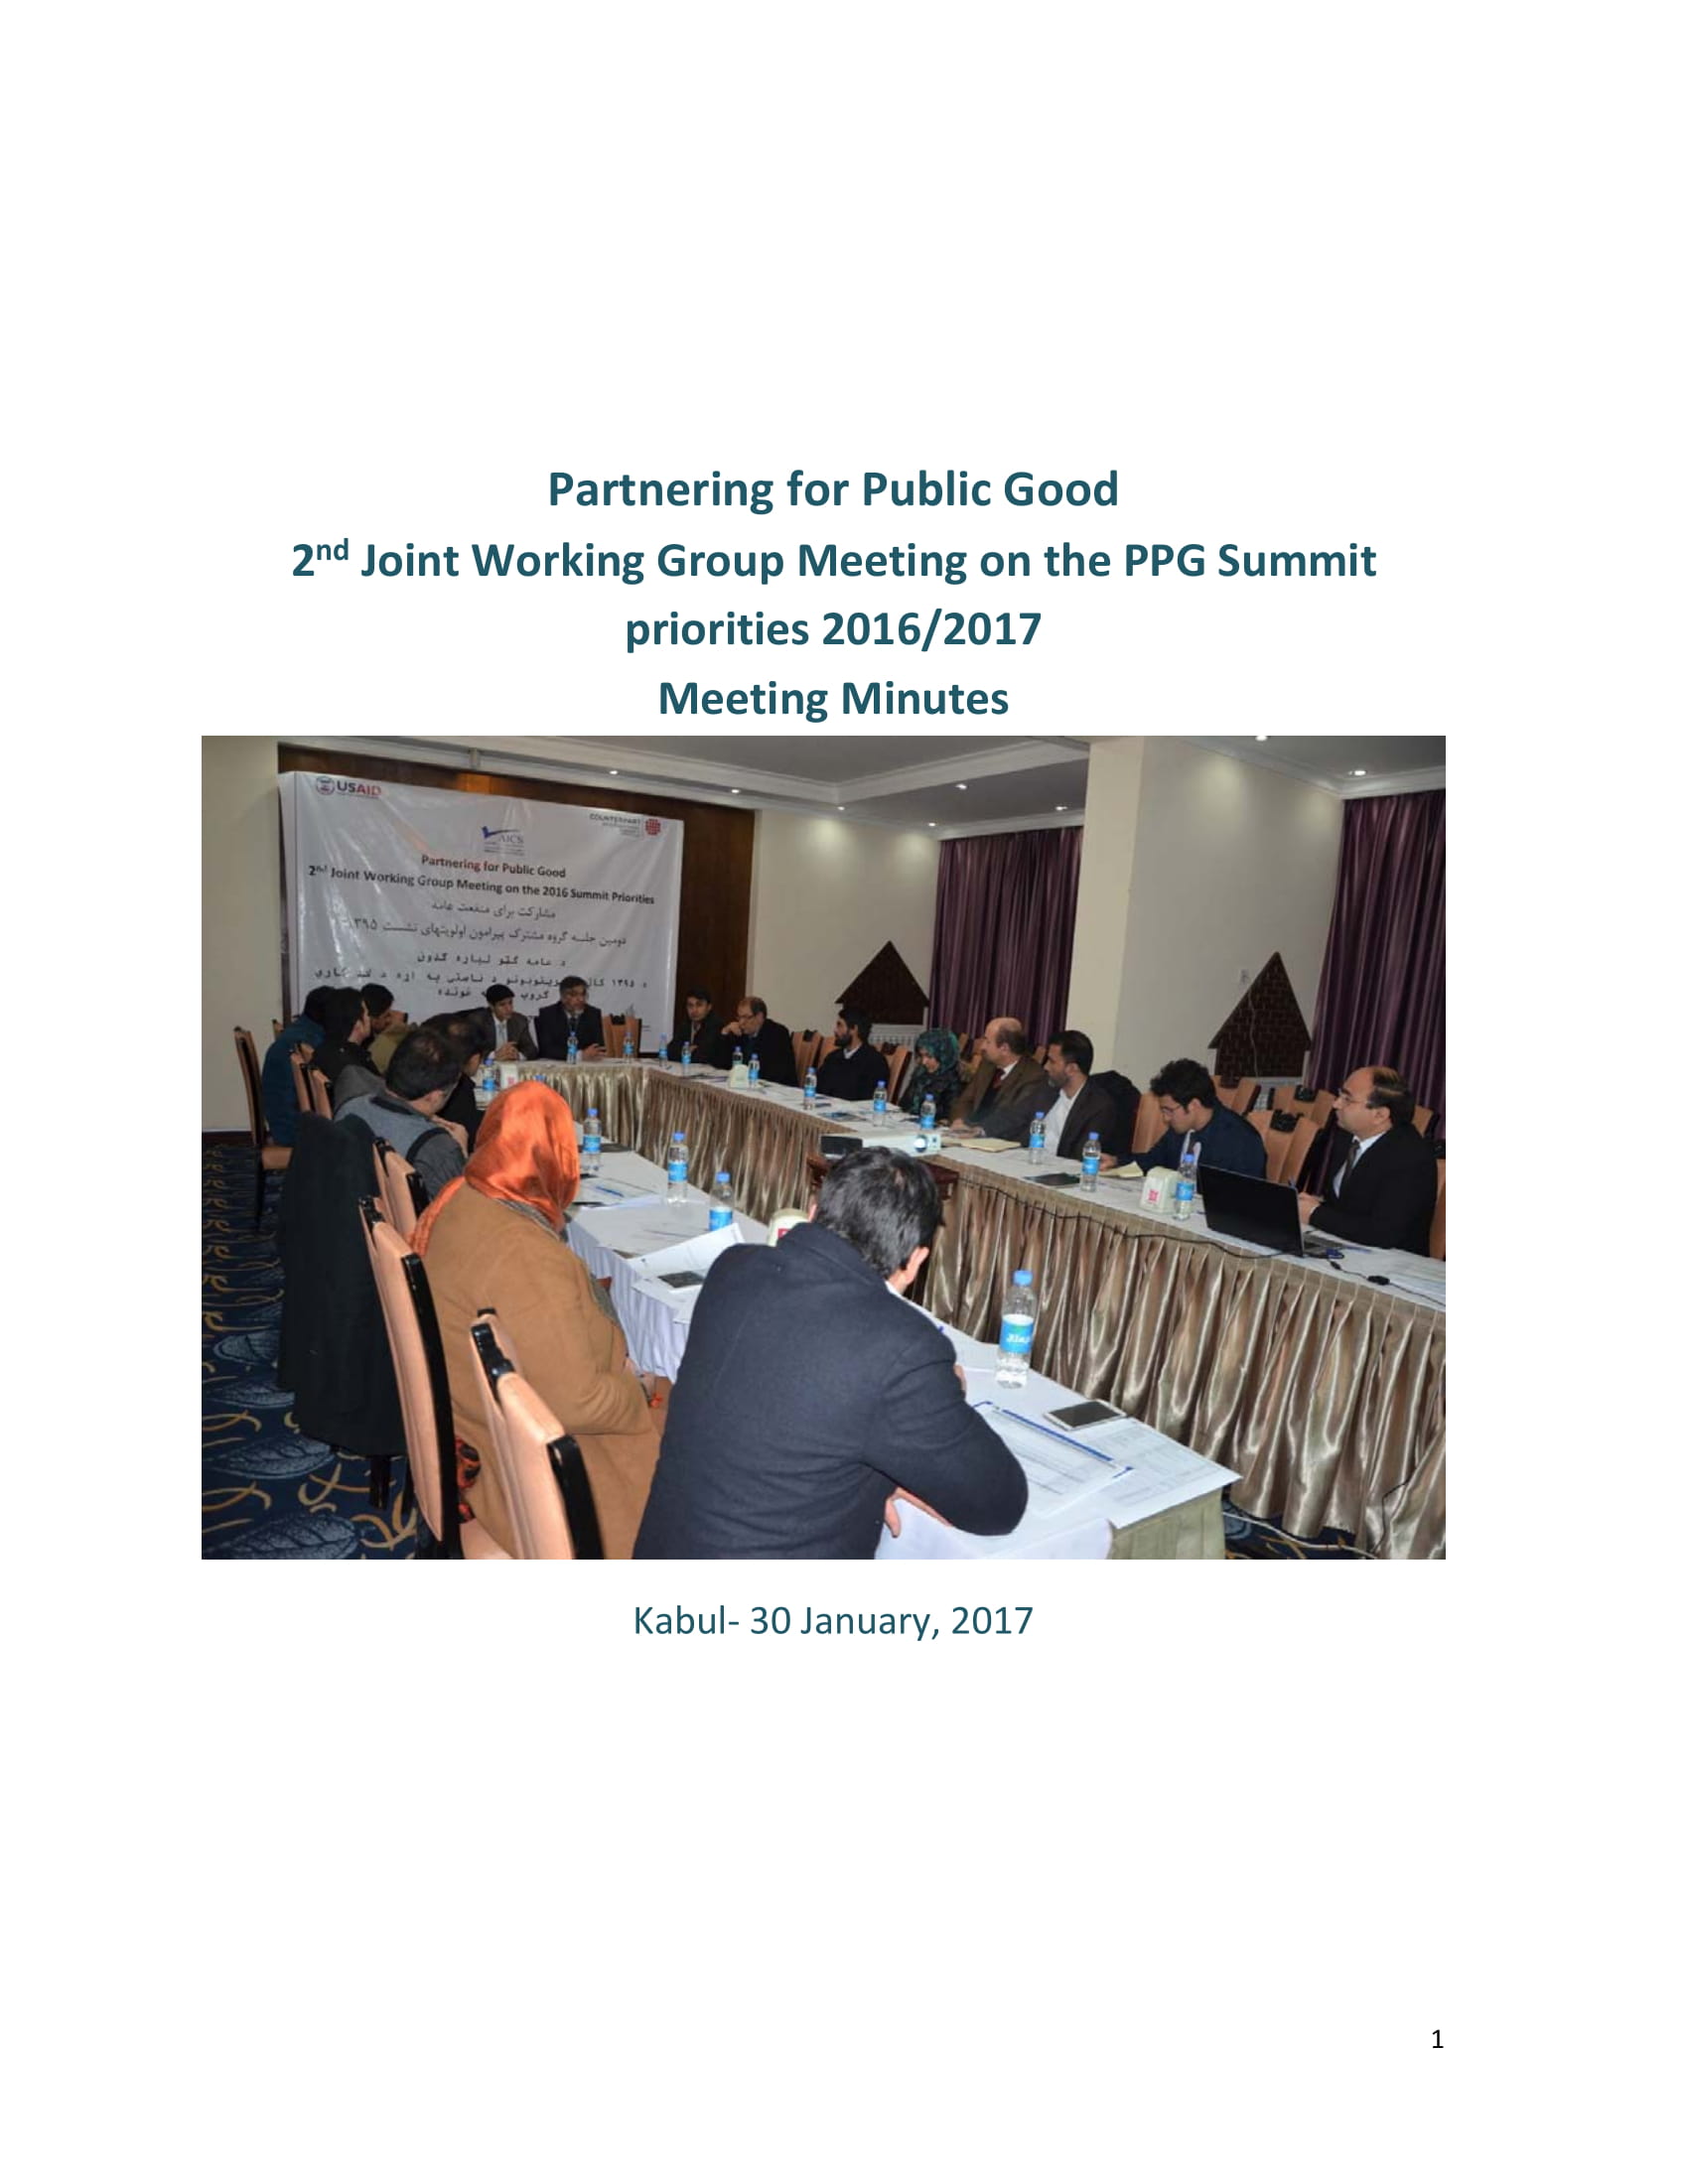 Partnering for Public Good 2nd Joint Working Group Meeting on the PPG Summit priorities 2016/2017